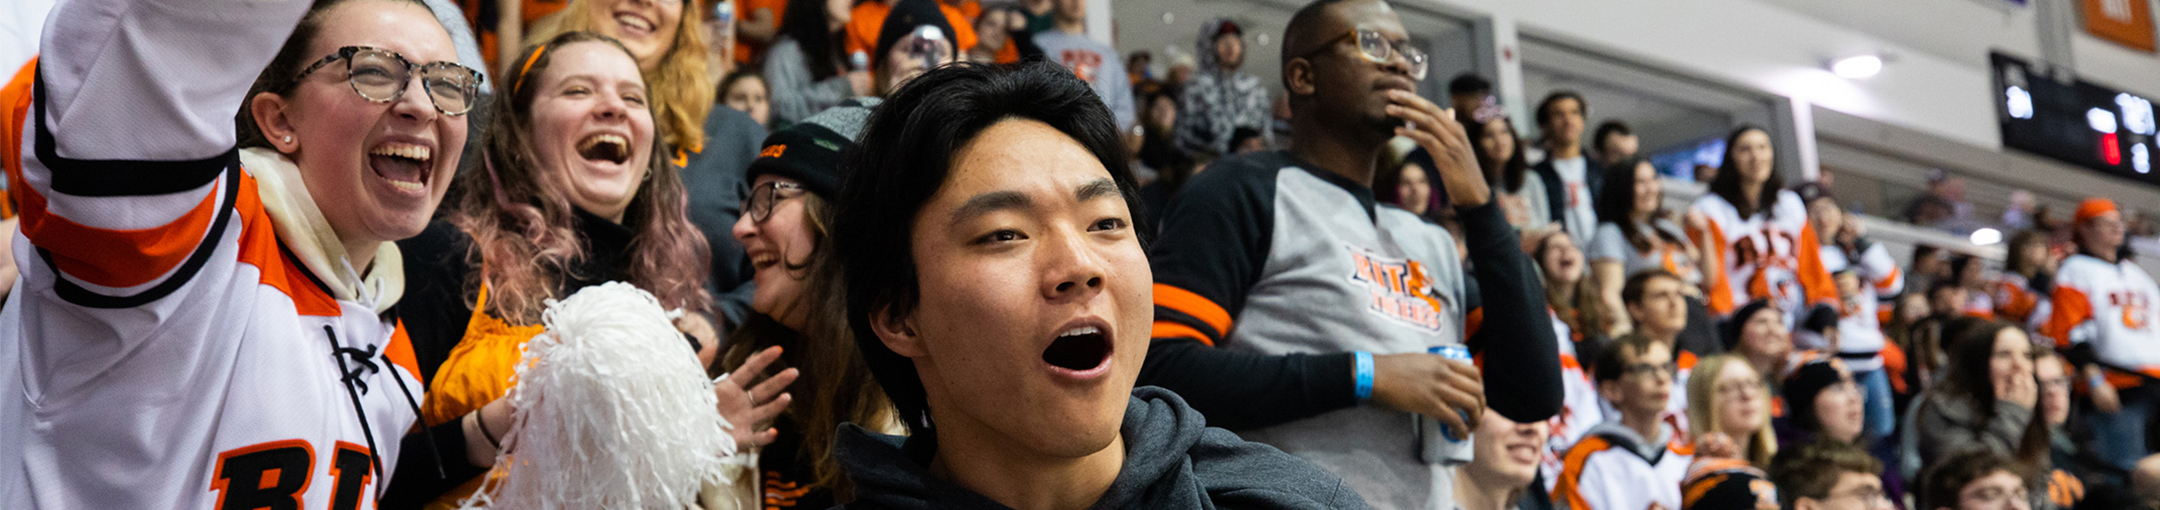 Students wearing R-I-T gear while cheering in the spectator section of a hockey game